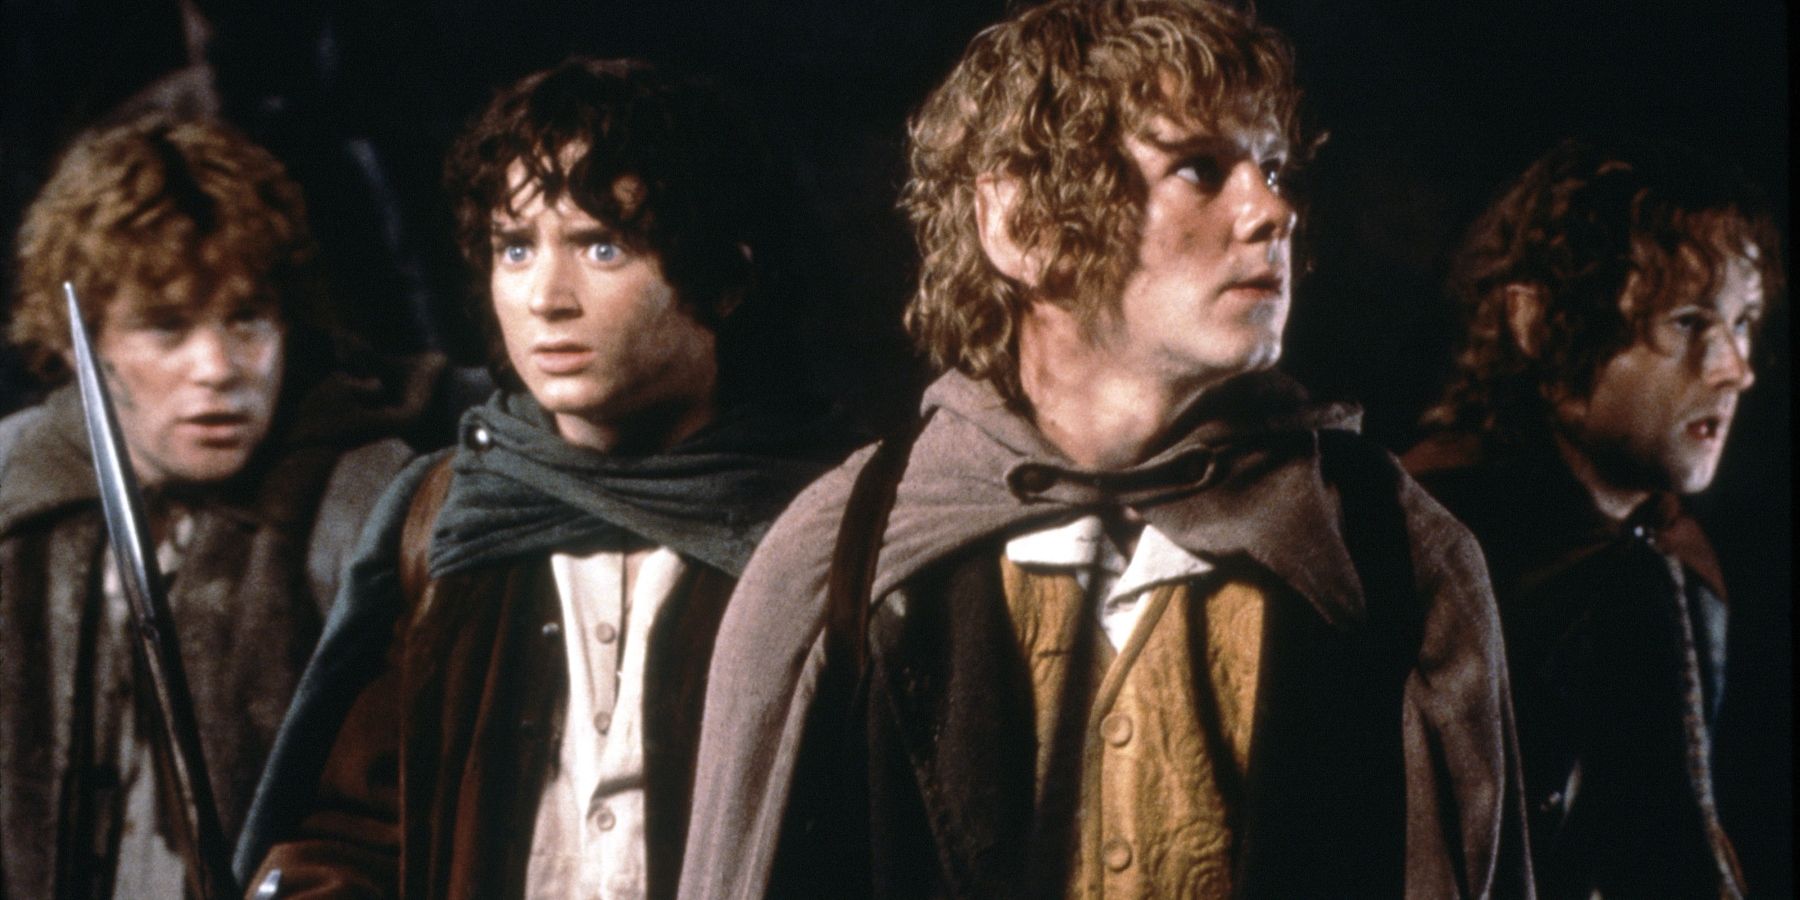 Hobbits_Brave_Lord of the Rings